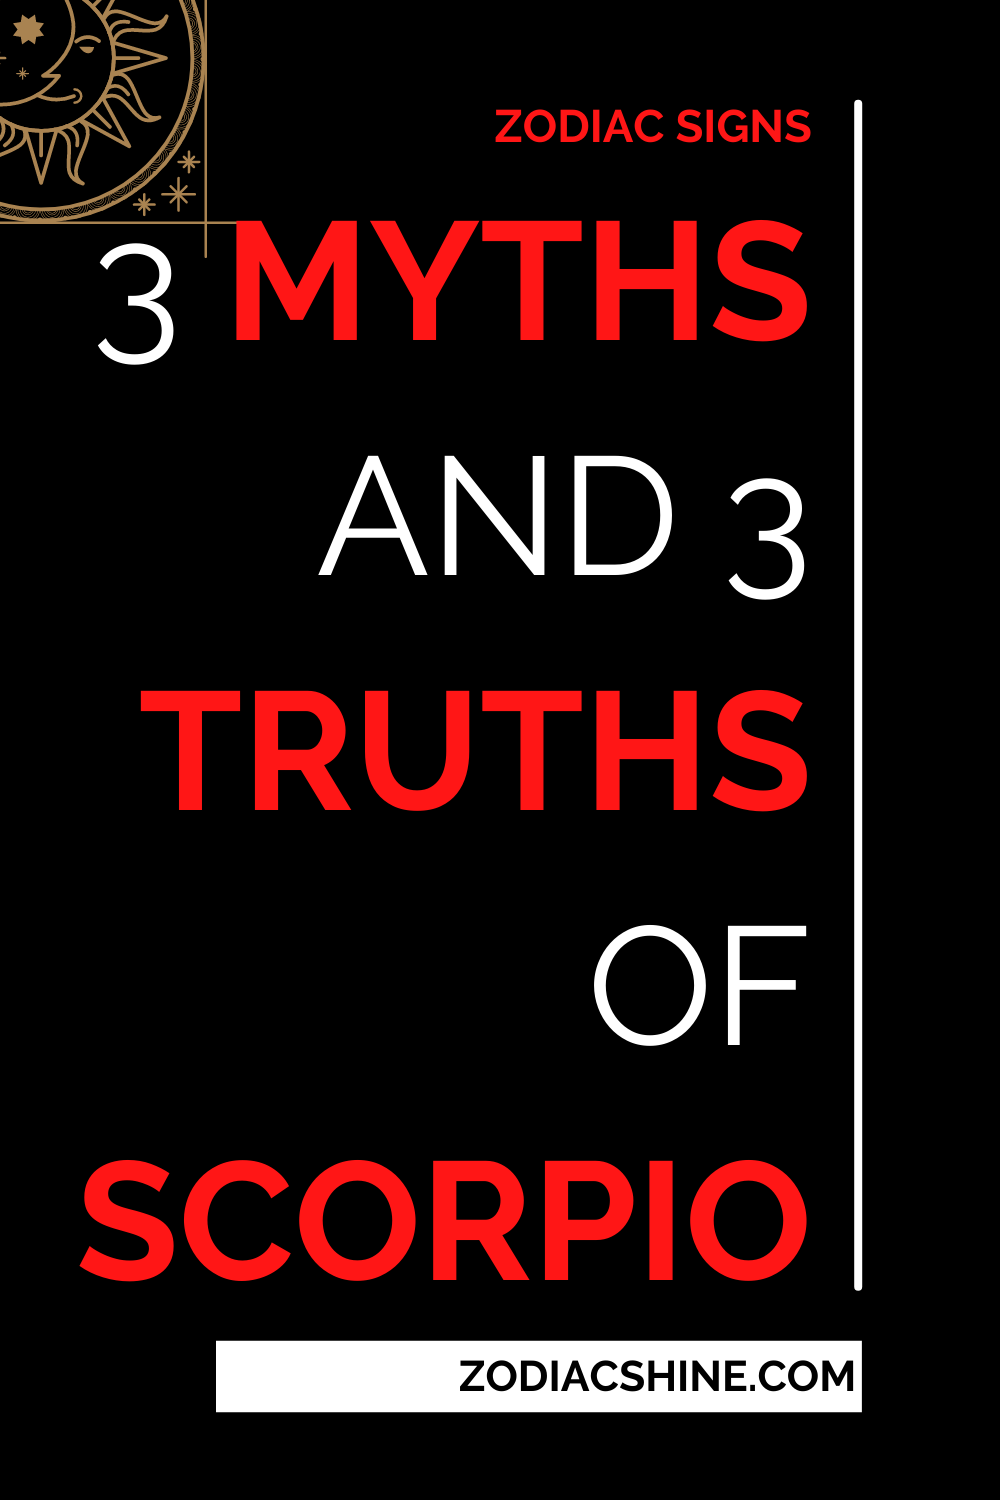 3 Myths And 3 Truths Of Scorpio